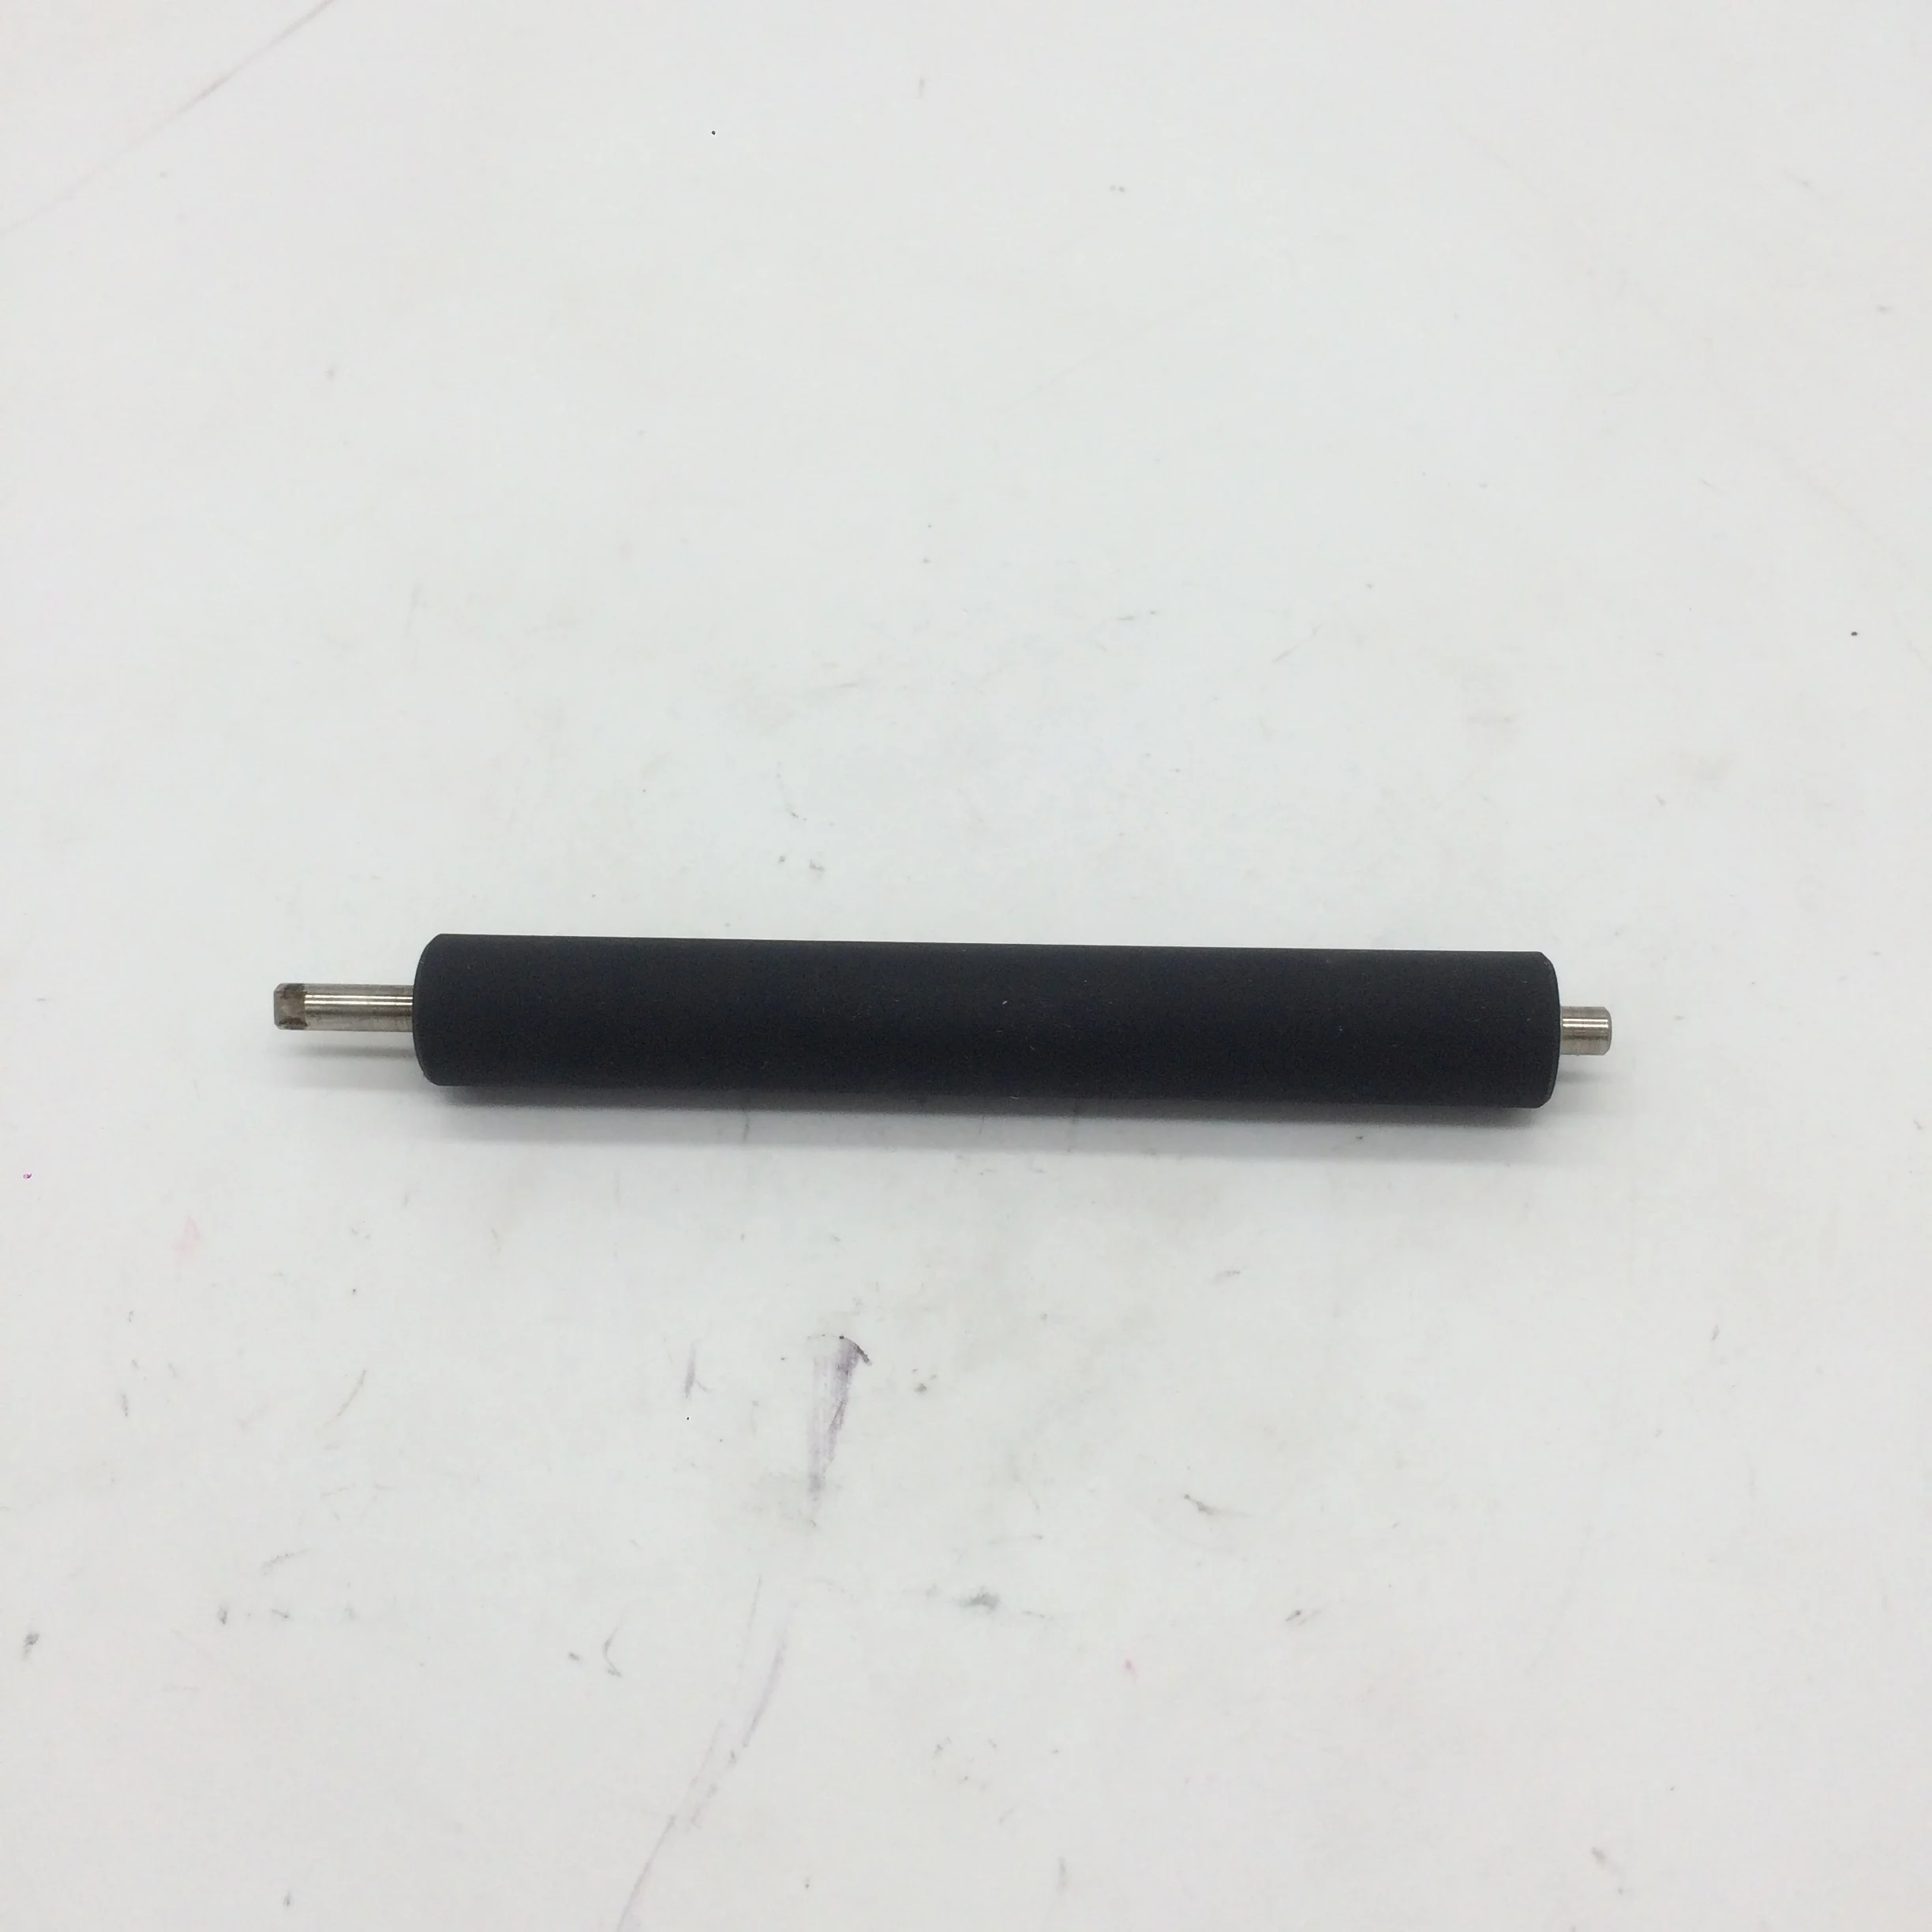 Printer Parts New and Original Roller for Zebra TLP2844 2844-Z TLP3842 3844-Z 2844 Roller 105910-055 GK888T Roller Glue Roller 